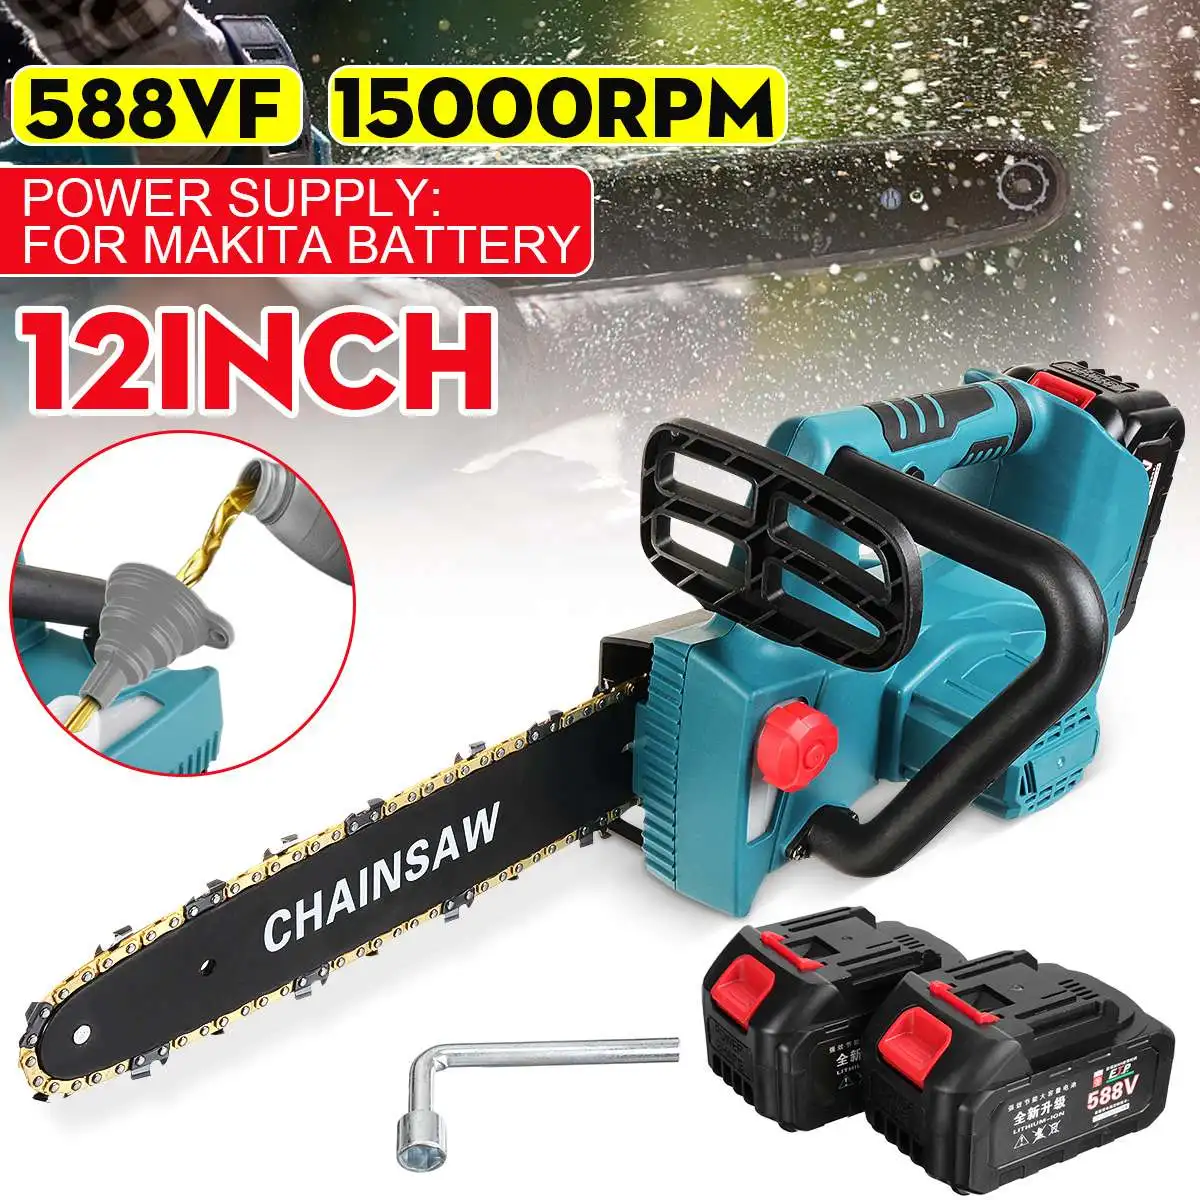 Chainsaw Chain Cutting Tools Cordless Electric for Makita Battery Saw Garden Hot 